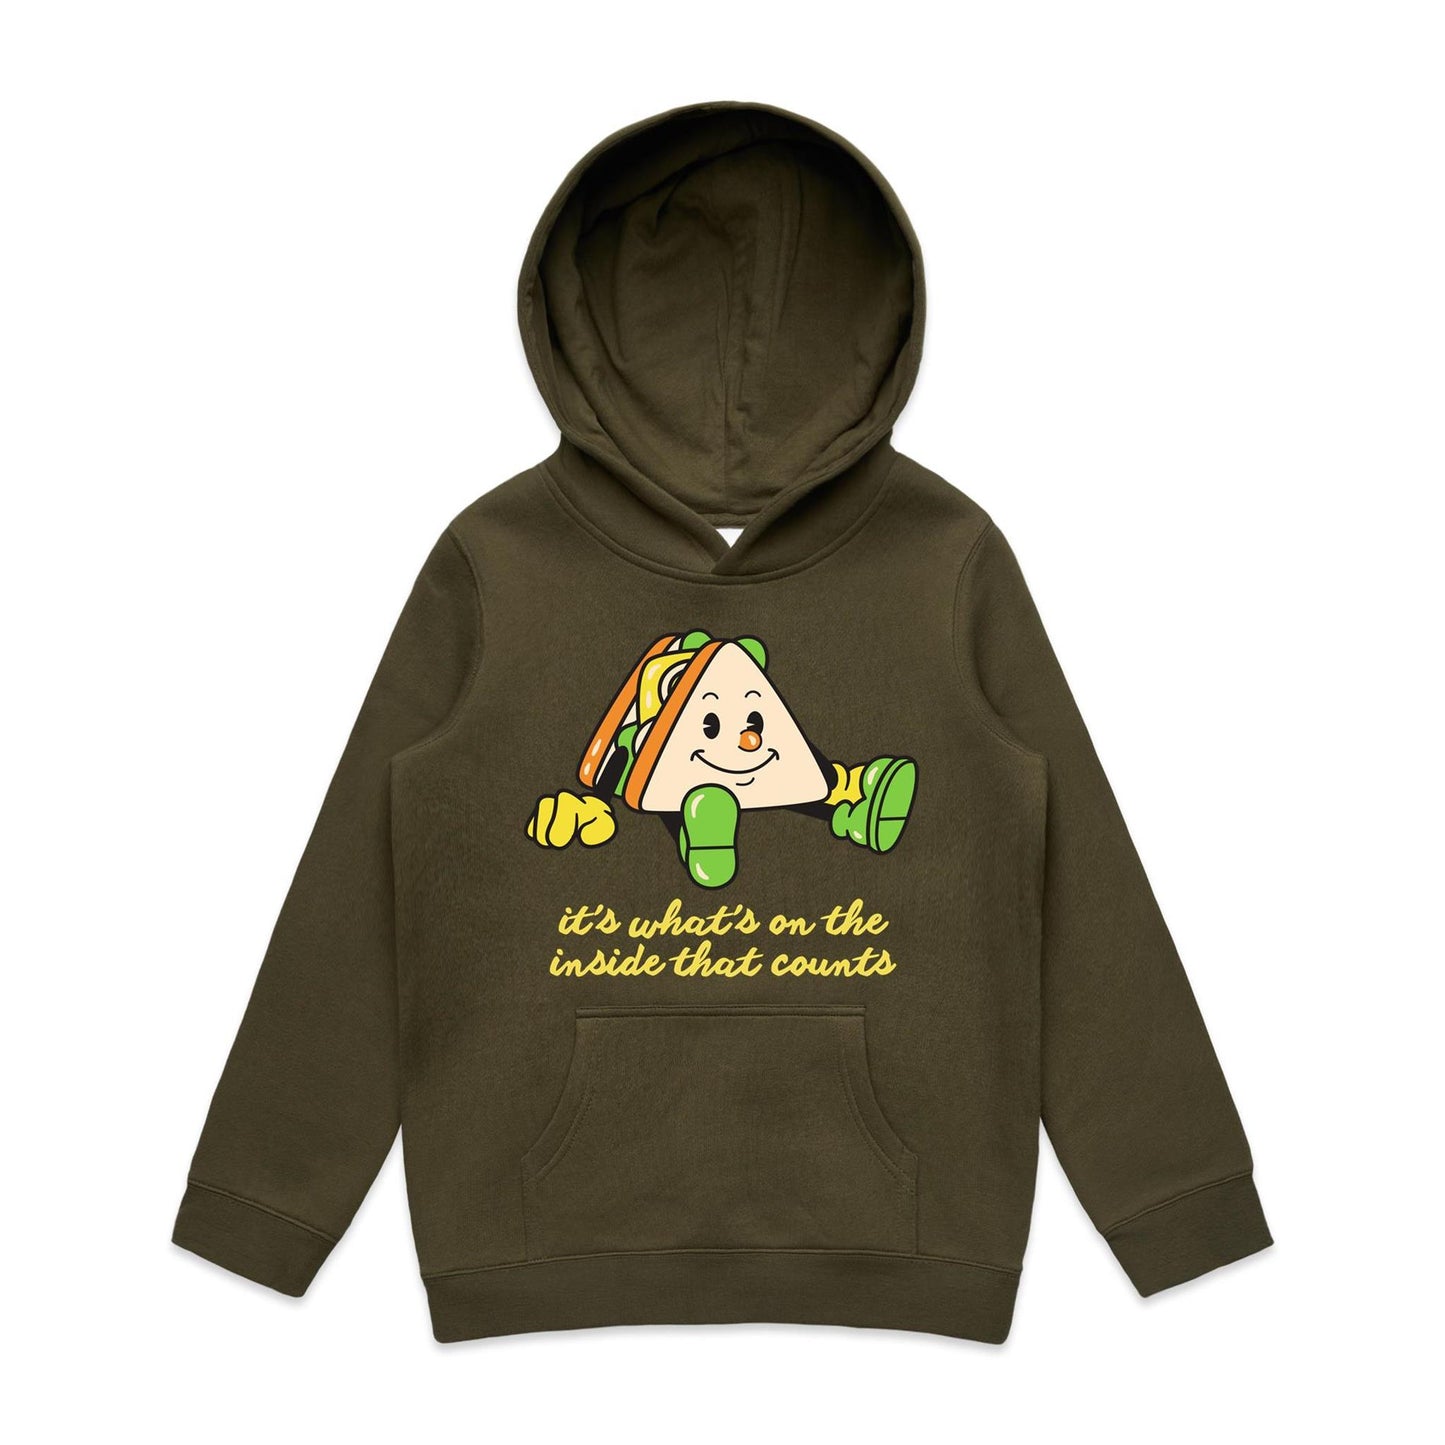 Sandwich, It's What's On The Inside That Counts - Youth Supply Hood Army Kids Hoodie Food Motivation